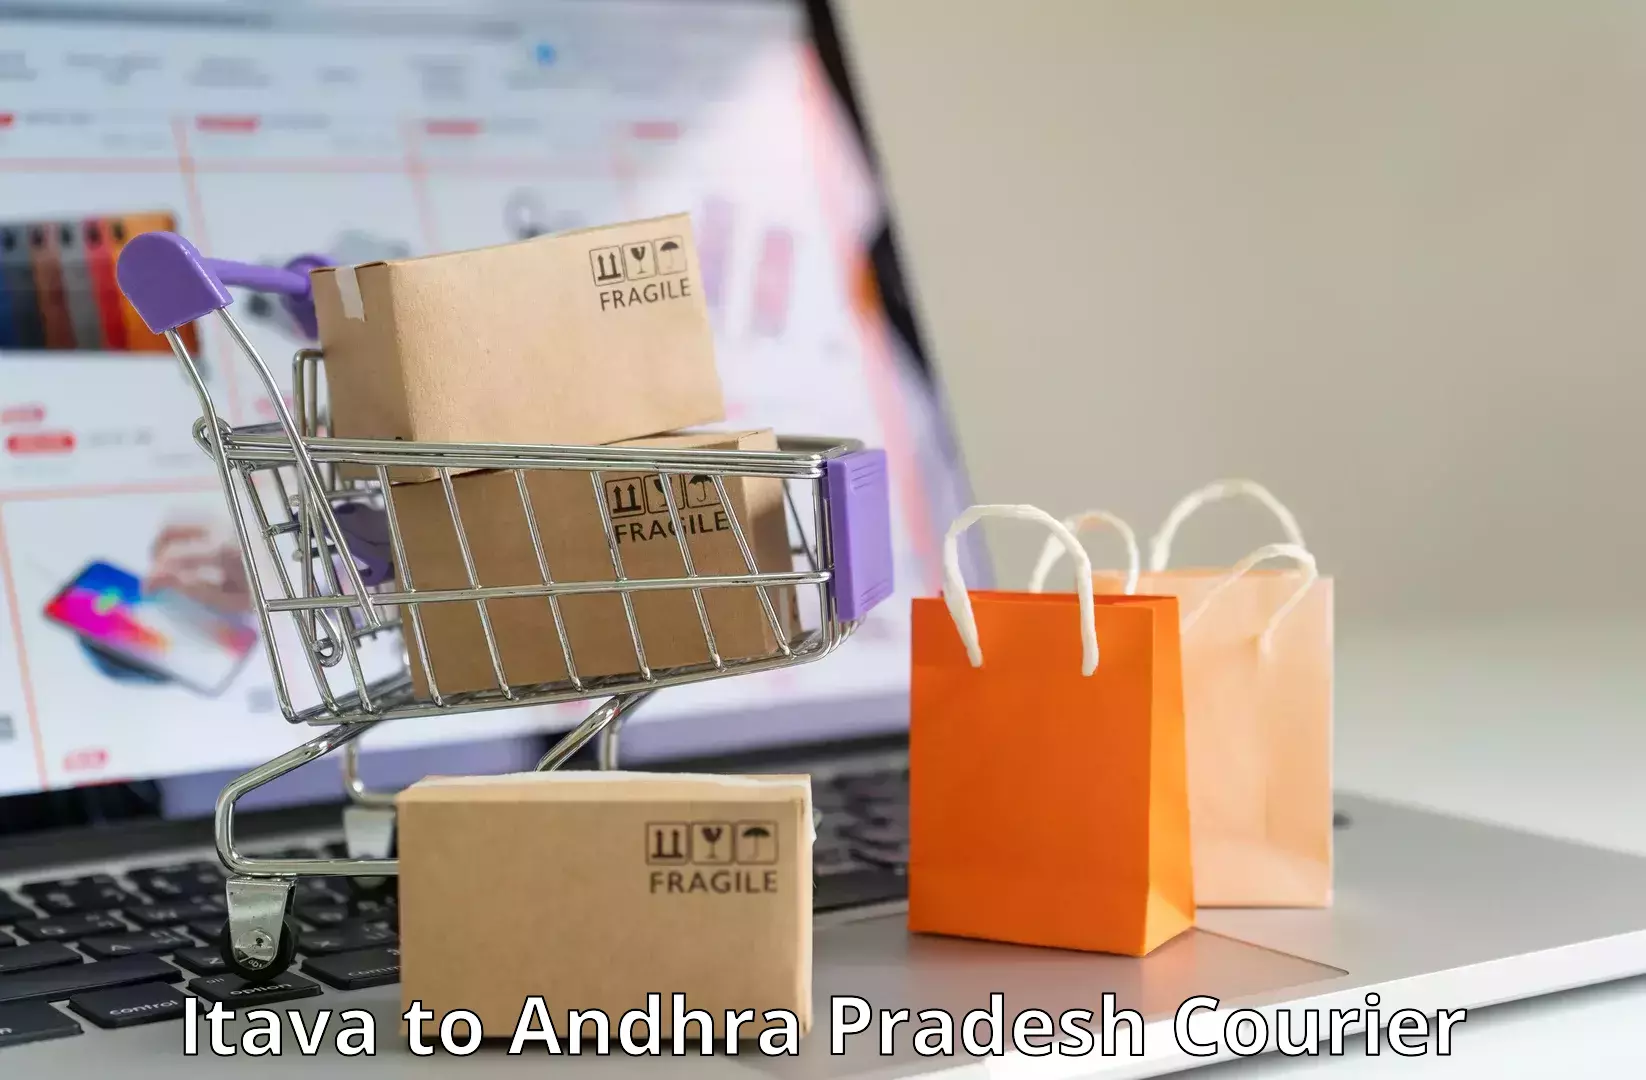 Online package tracking Itava to Vempalli